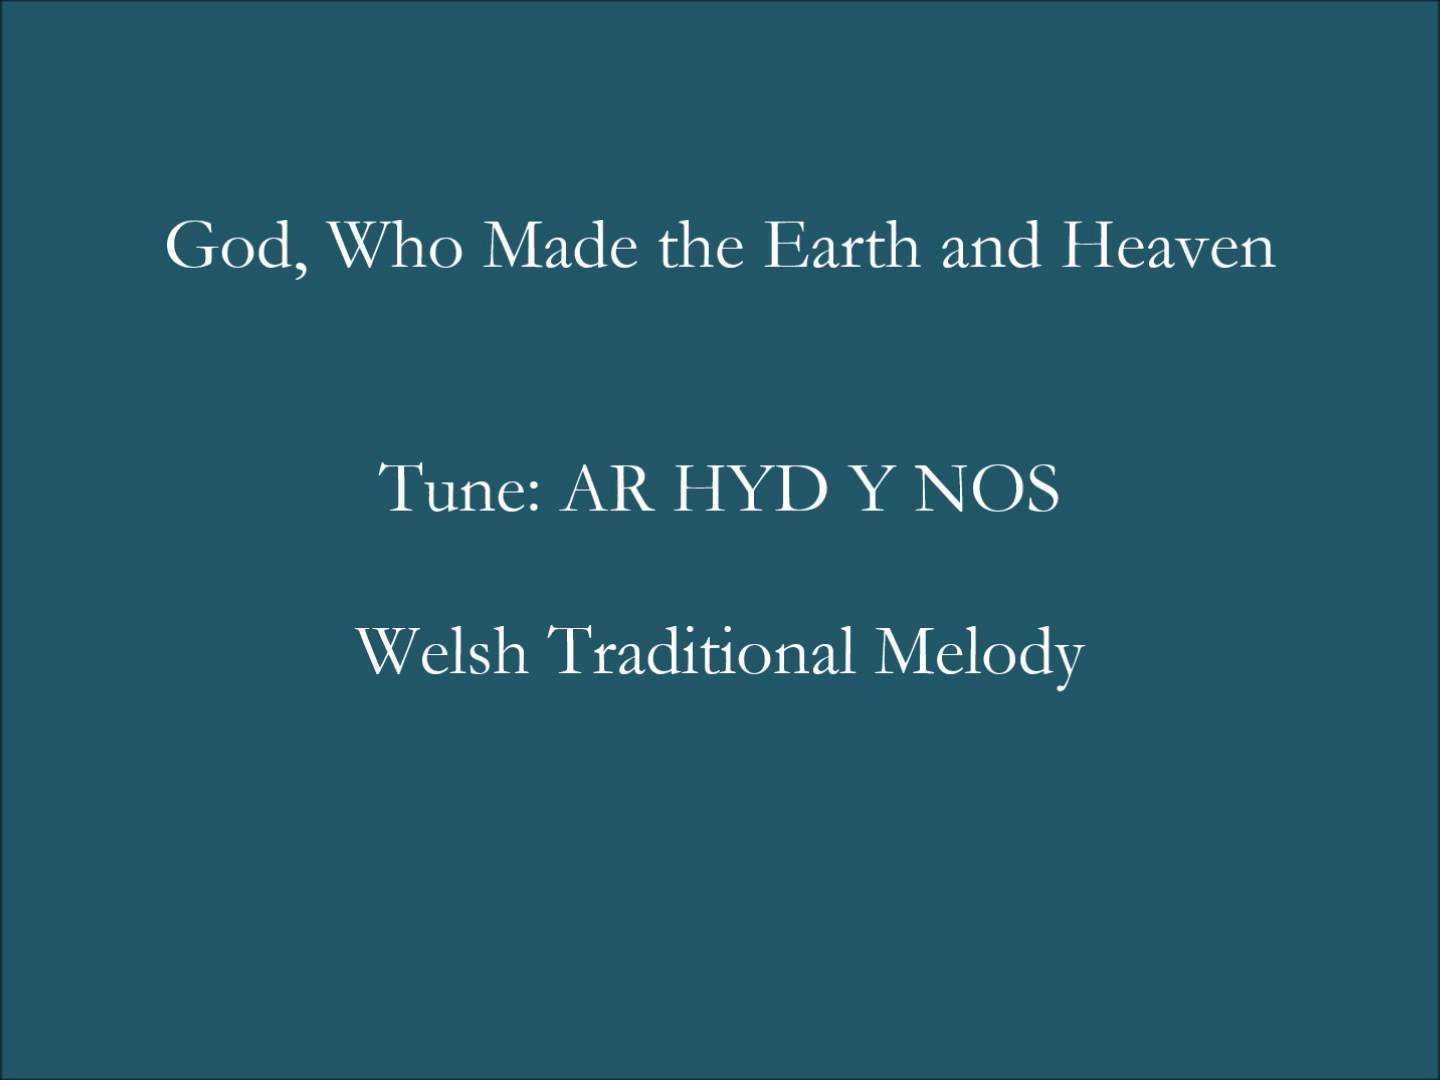 Song lyrics to God, Who Made the Earth and Heaven by Reginald Heber, traditional Welsh melody, Tune: Ar Hyd Y Nos, 1st Published in 1827